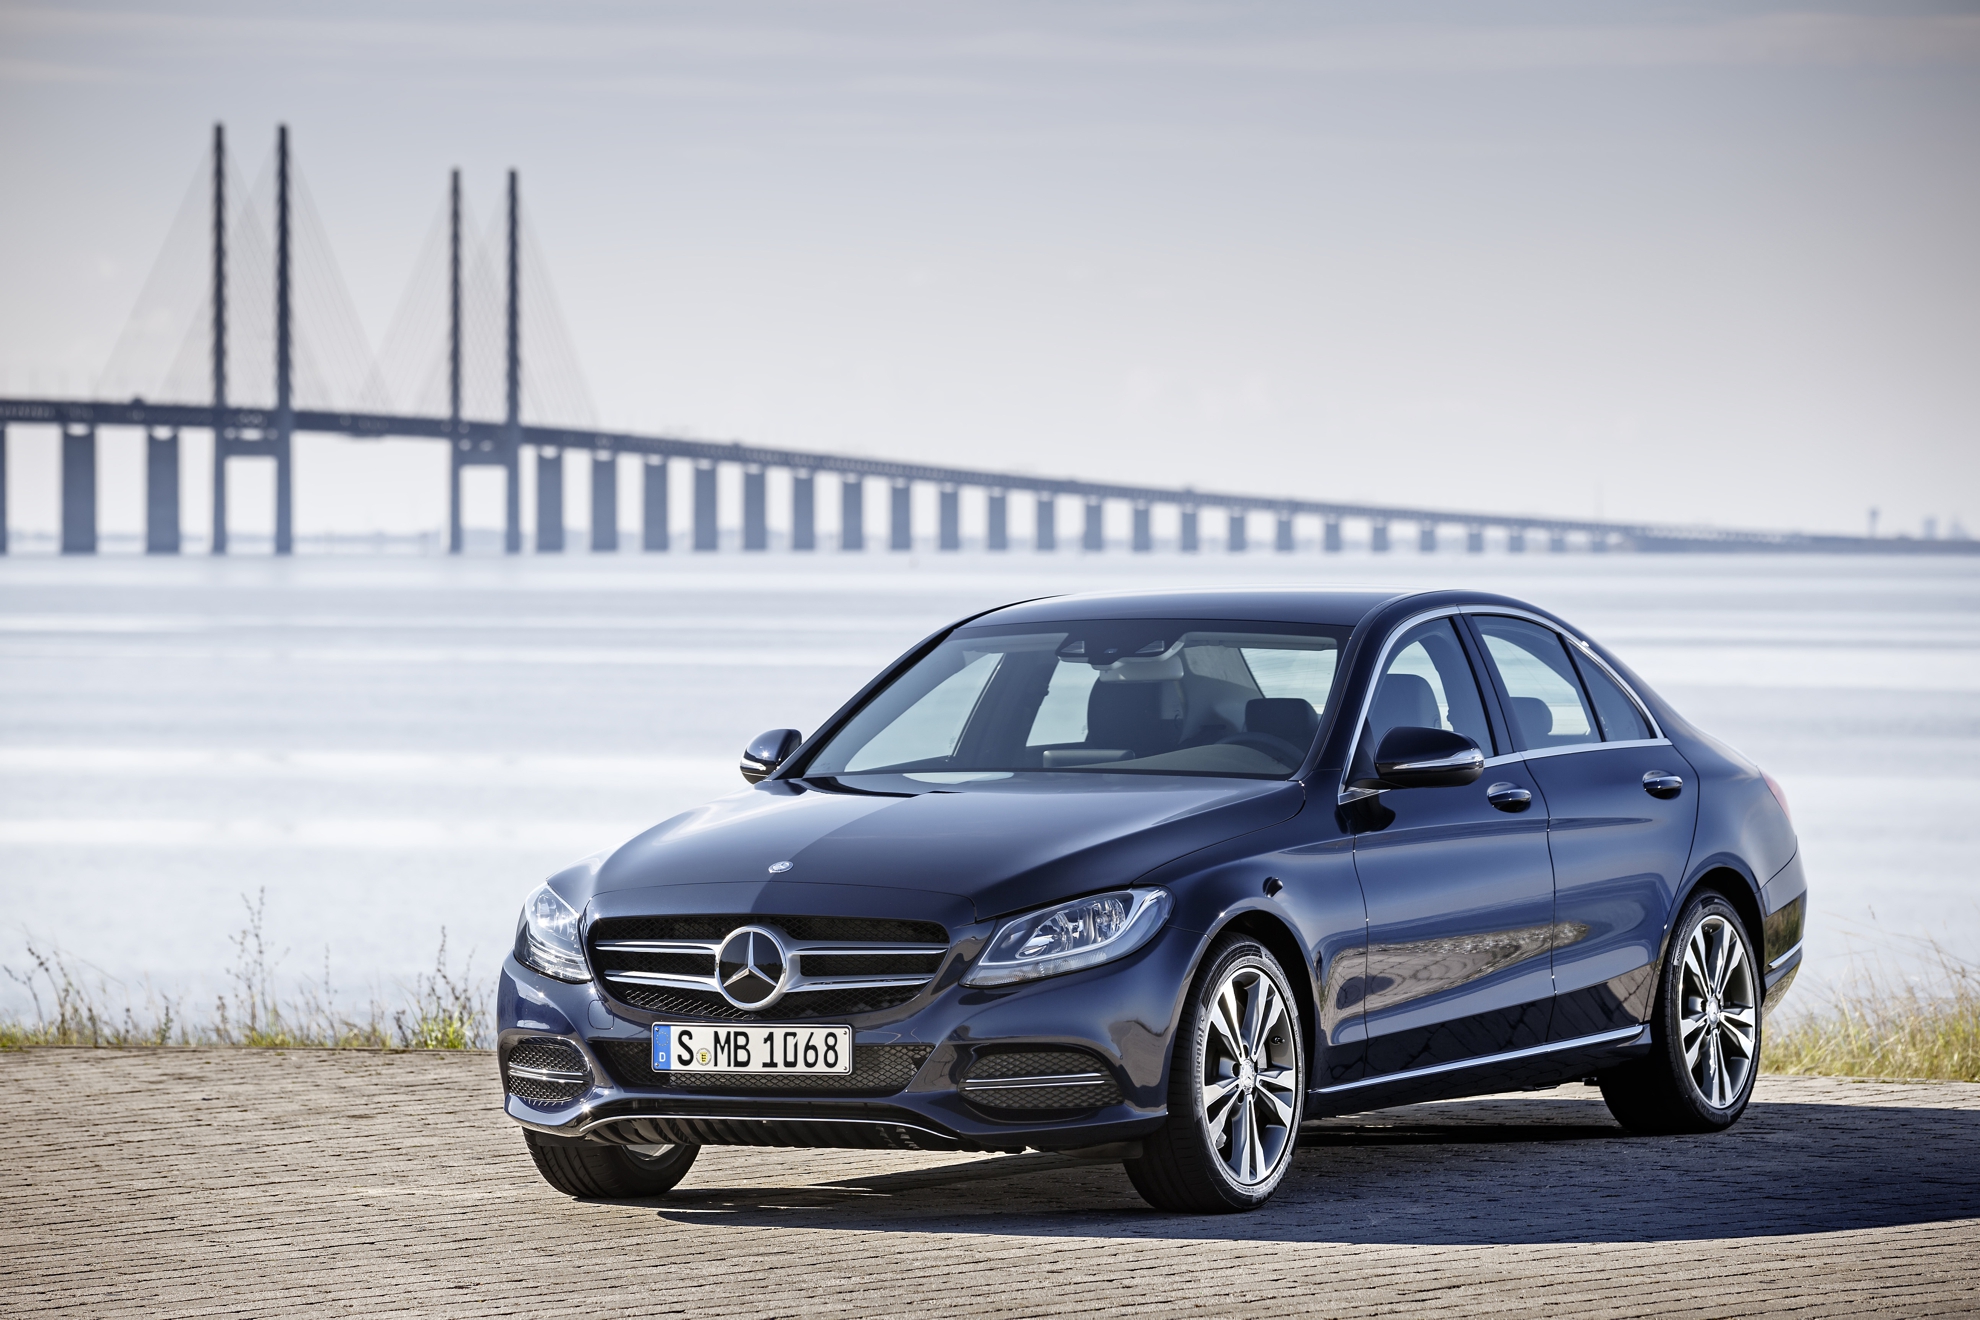 MERCEDES-BENZ C CLASS – 2015 WORLD CAR OF THE YEAR